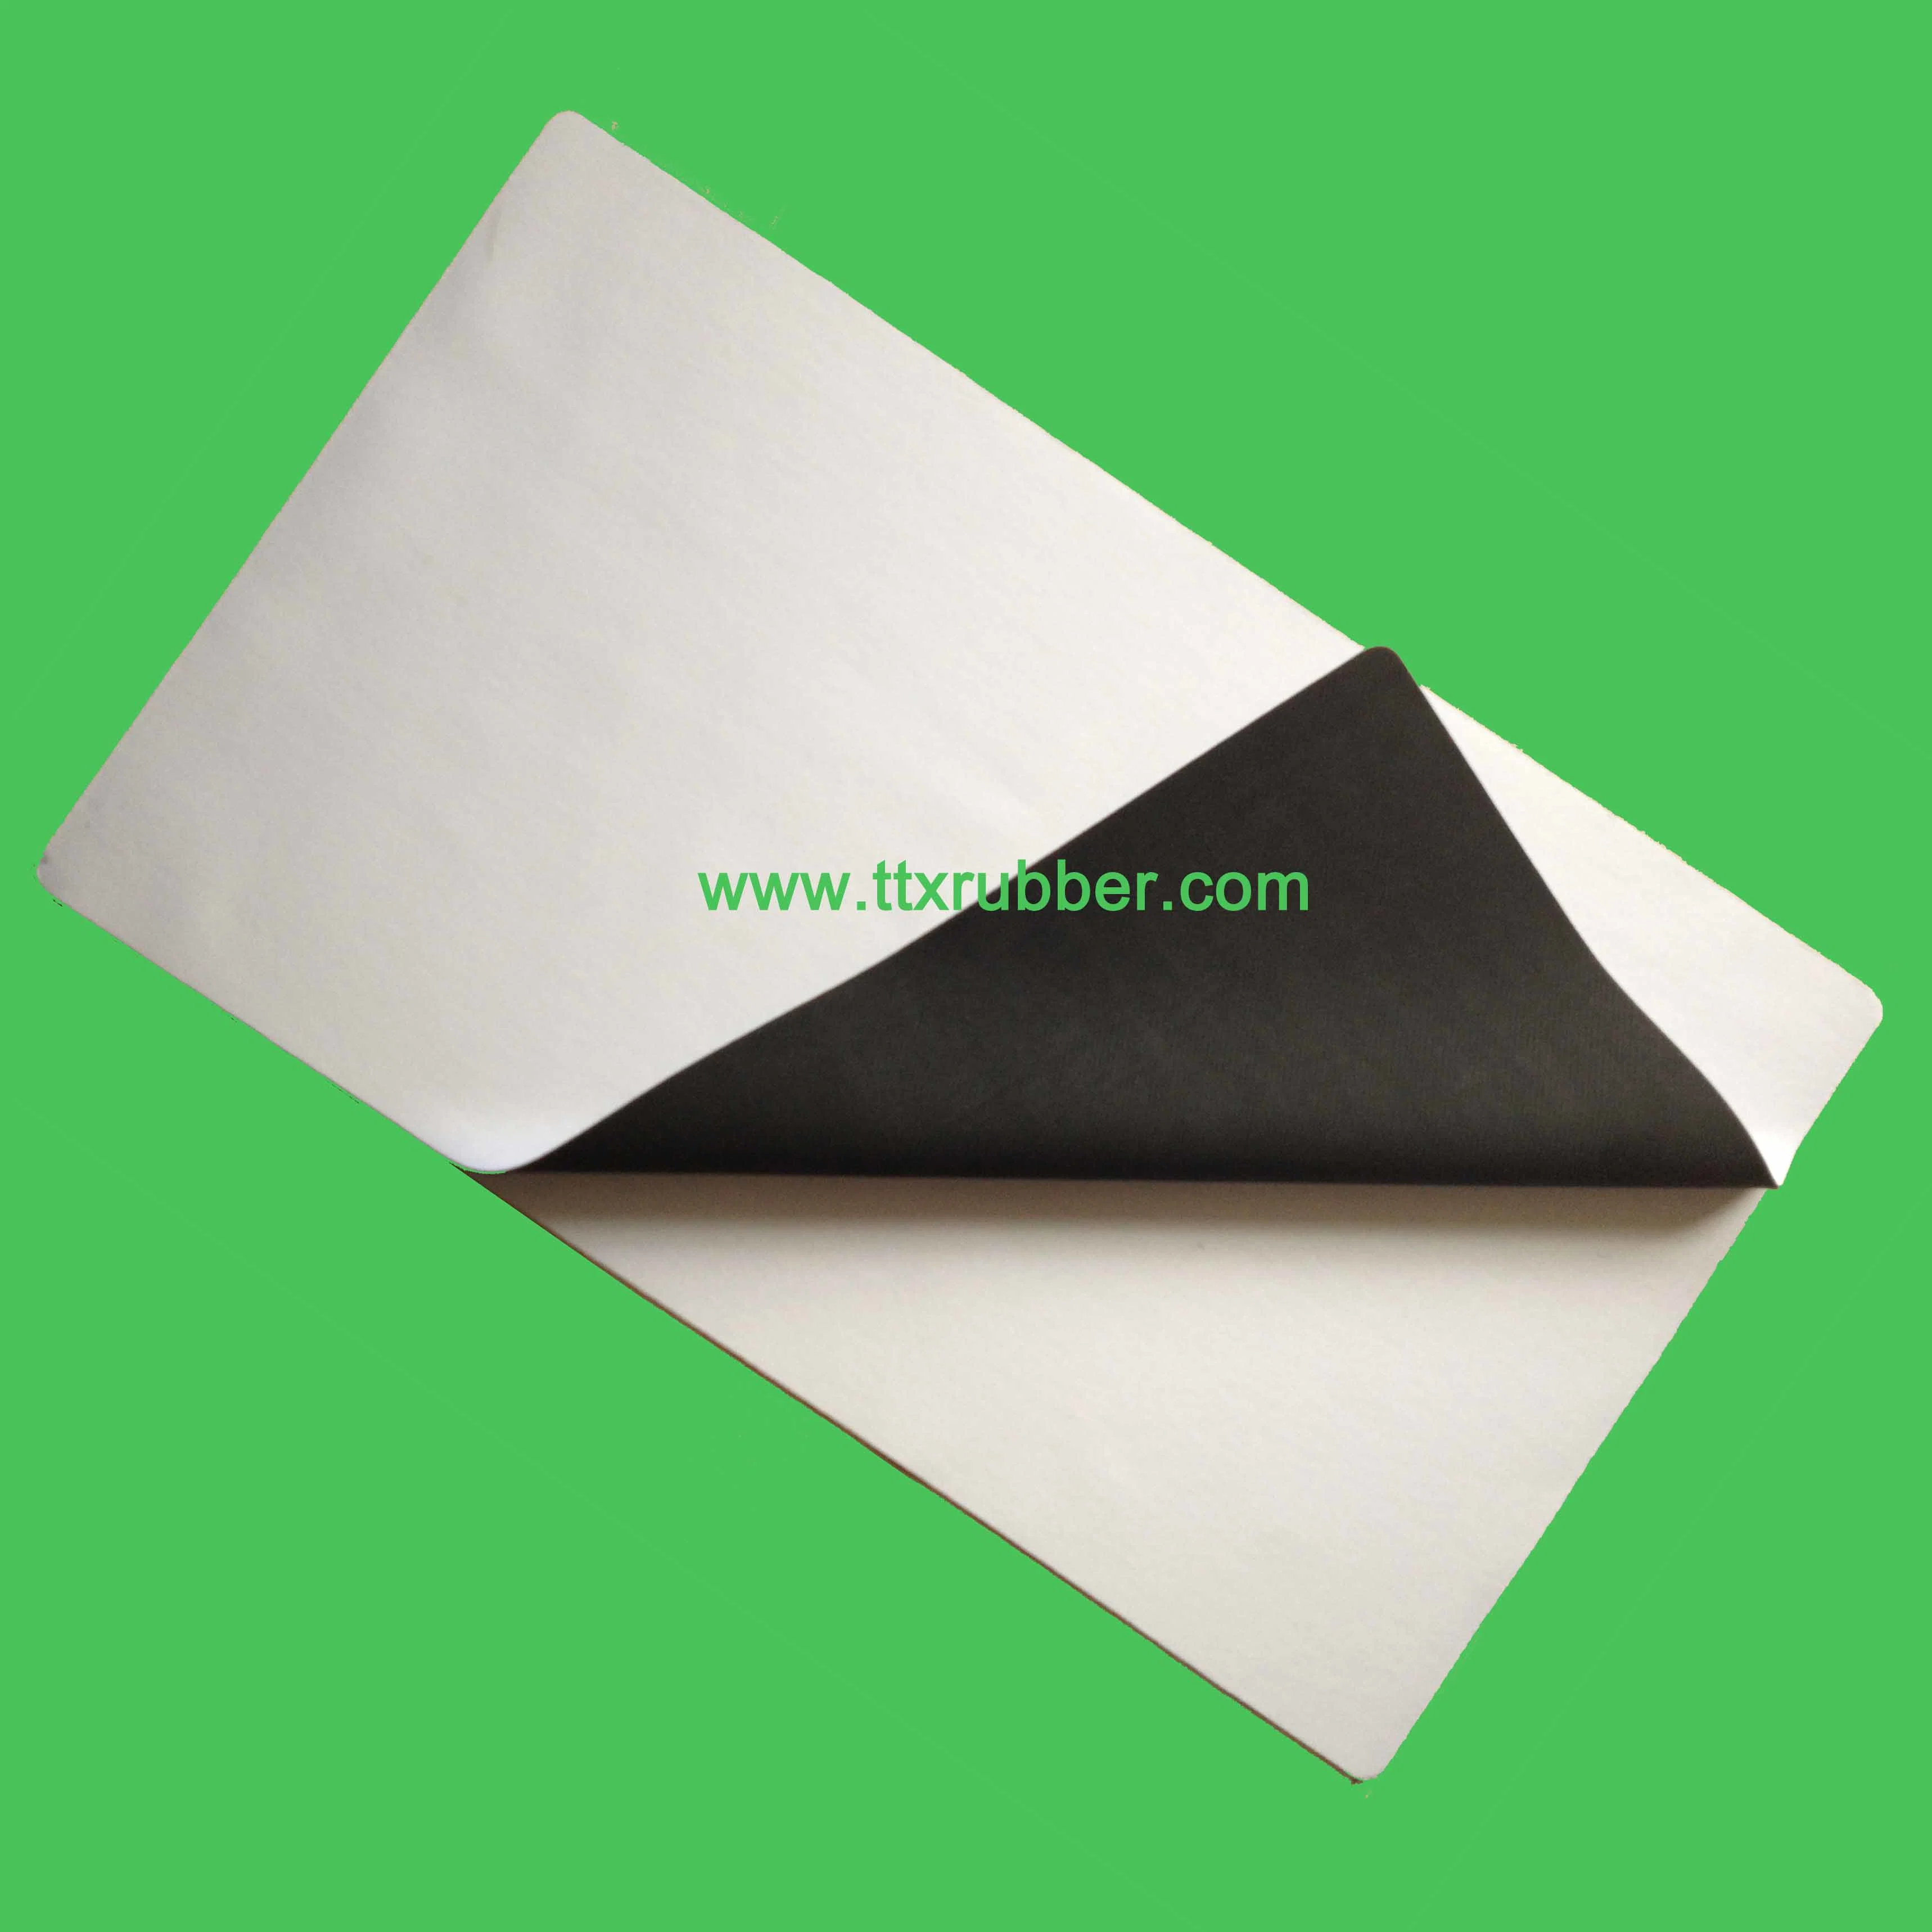 Natural Foam Rubber Mouse Pad Material